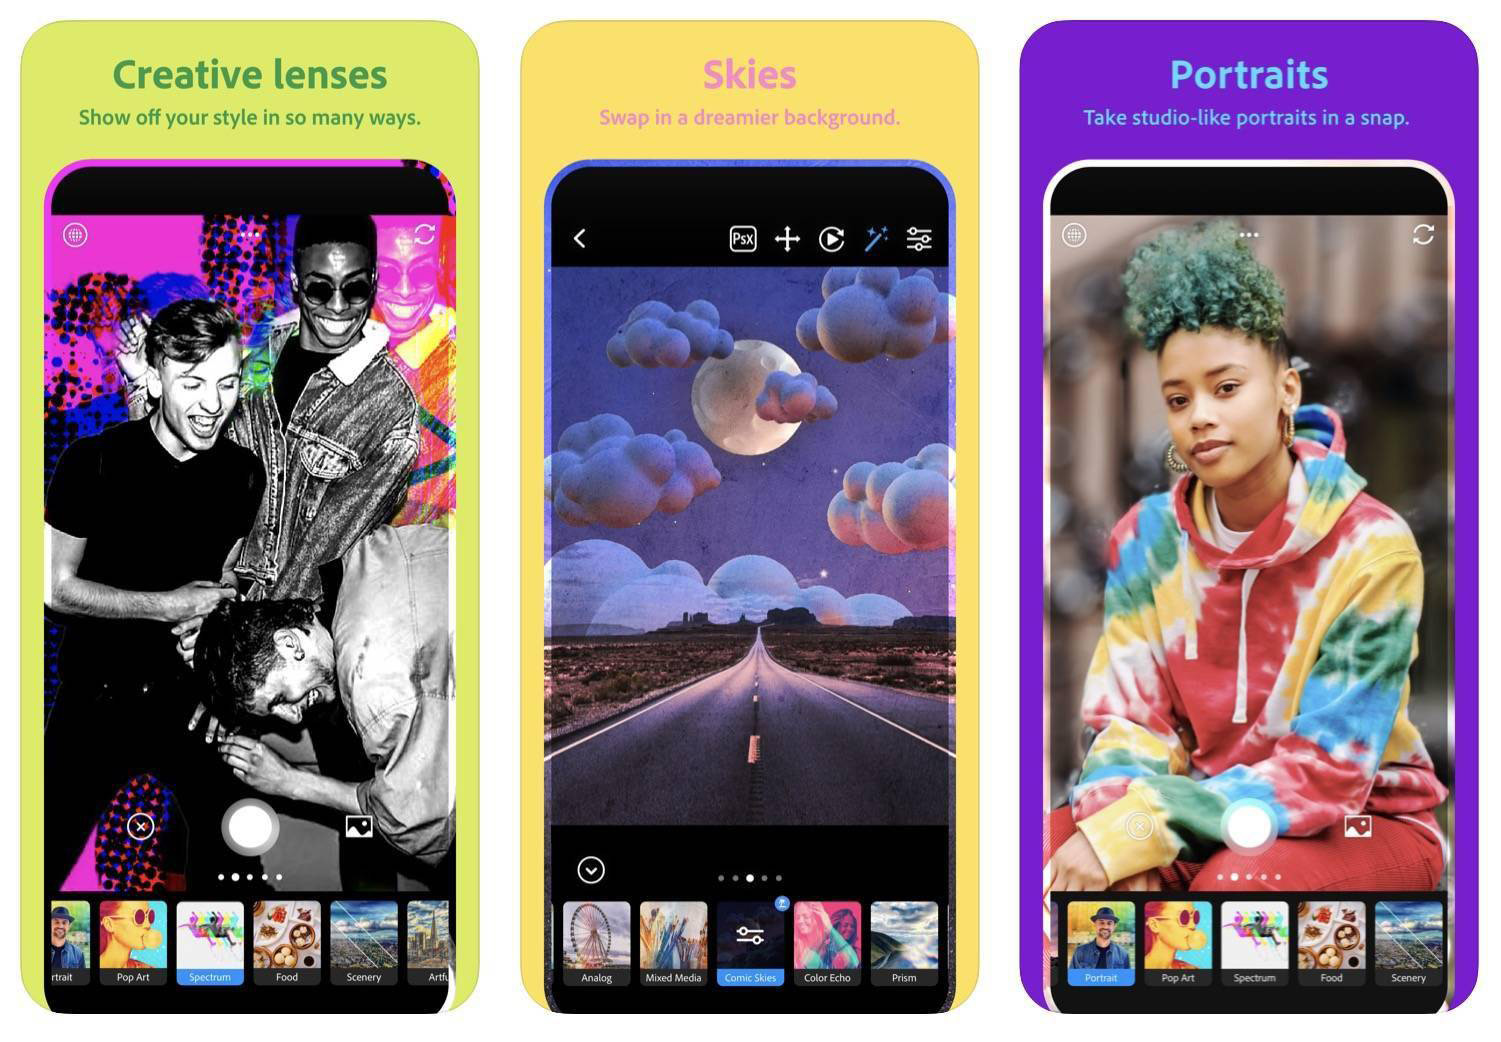 Adobe Launches 'Photoshop Camera' App on iPhone